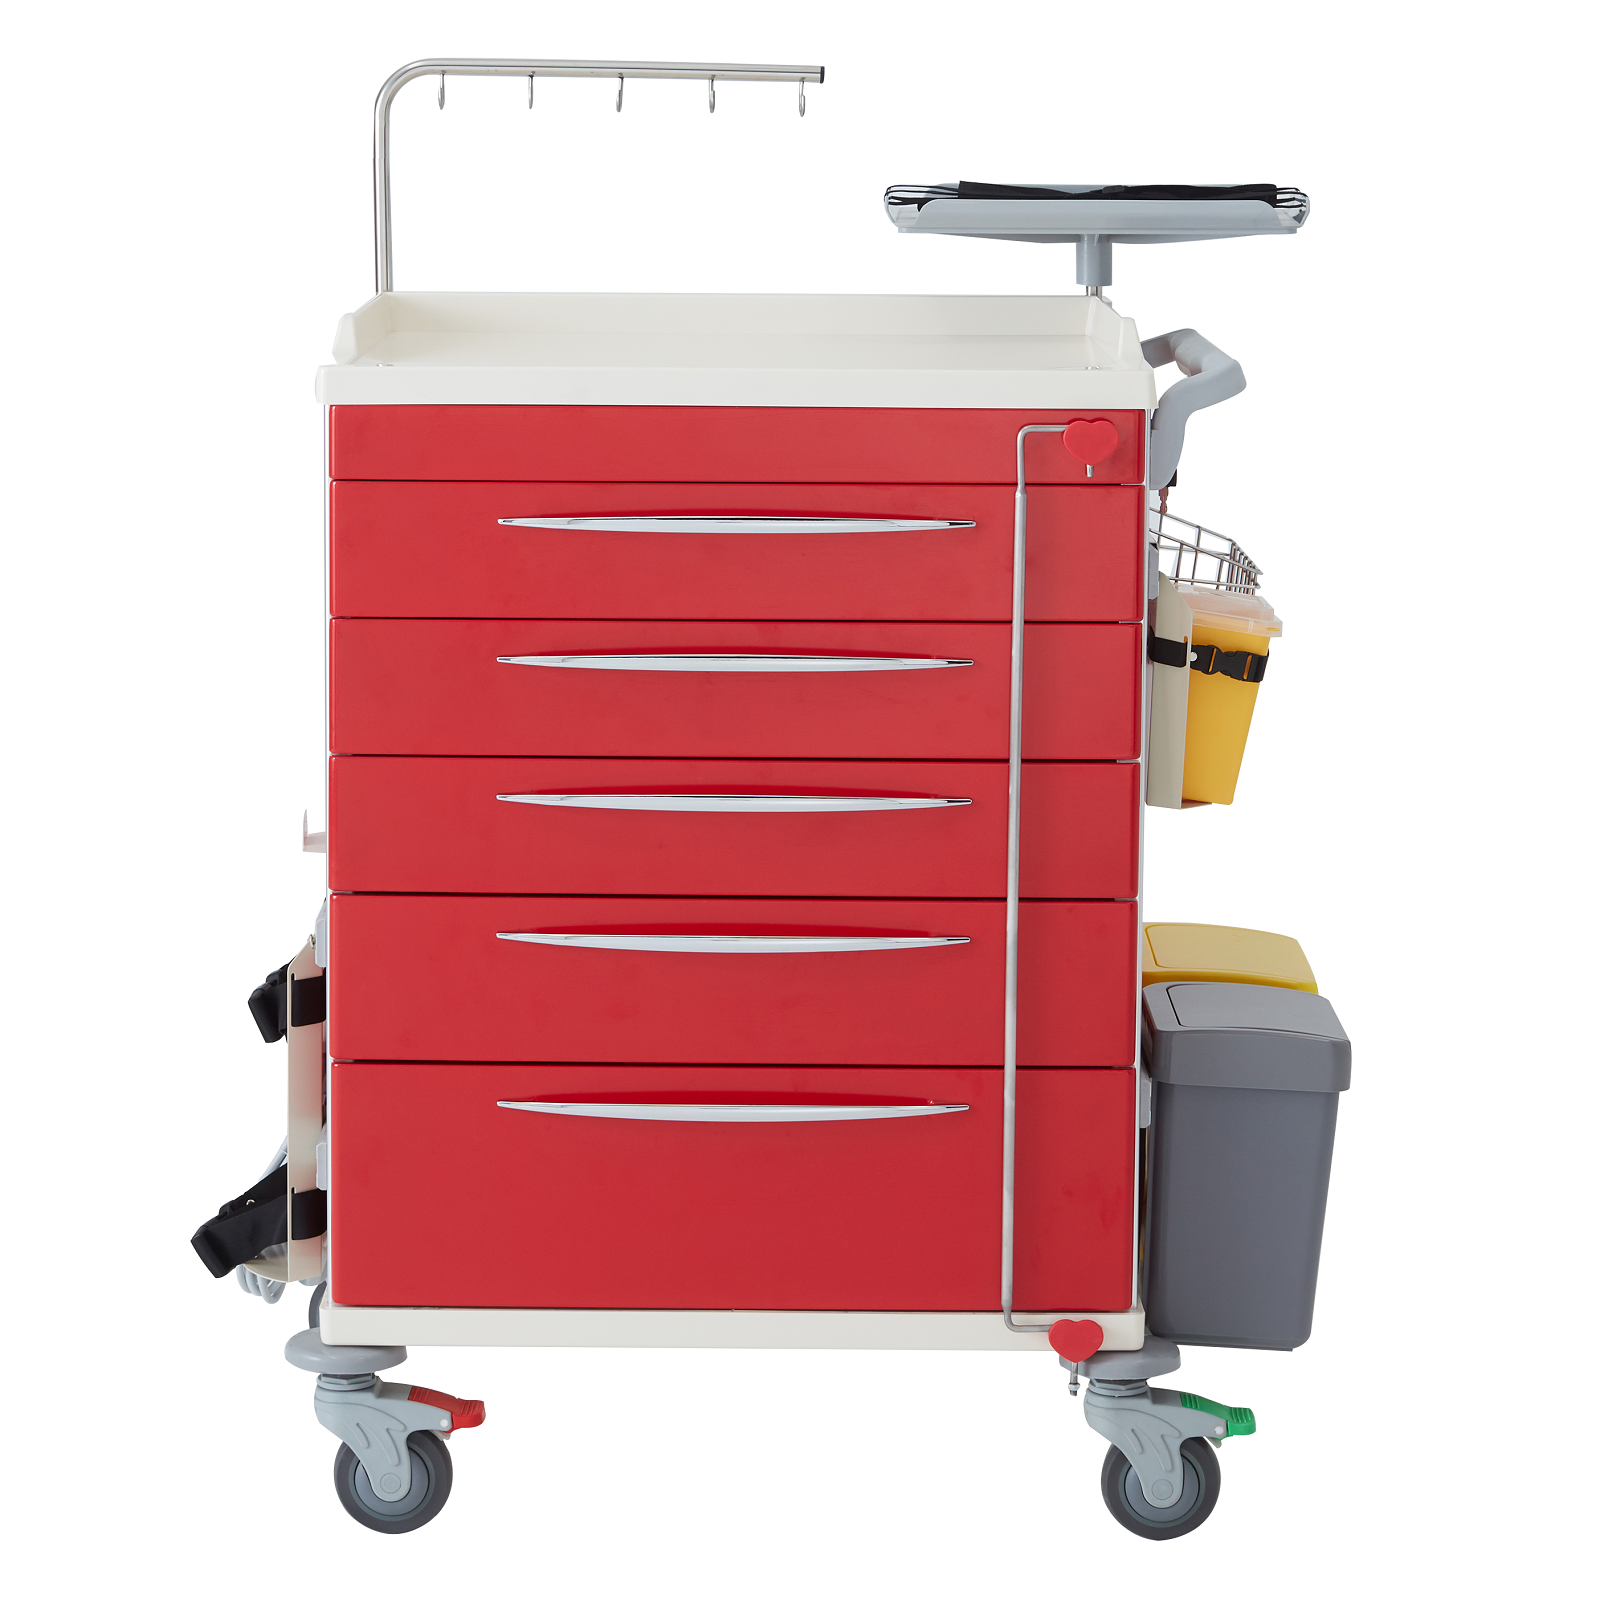 A rugged portable emergency trolley constructed with steel &amp; ABS. Along with a heavy load rating and full set of accessories included it's a best seller.